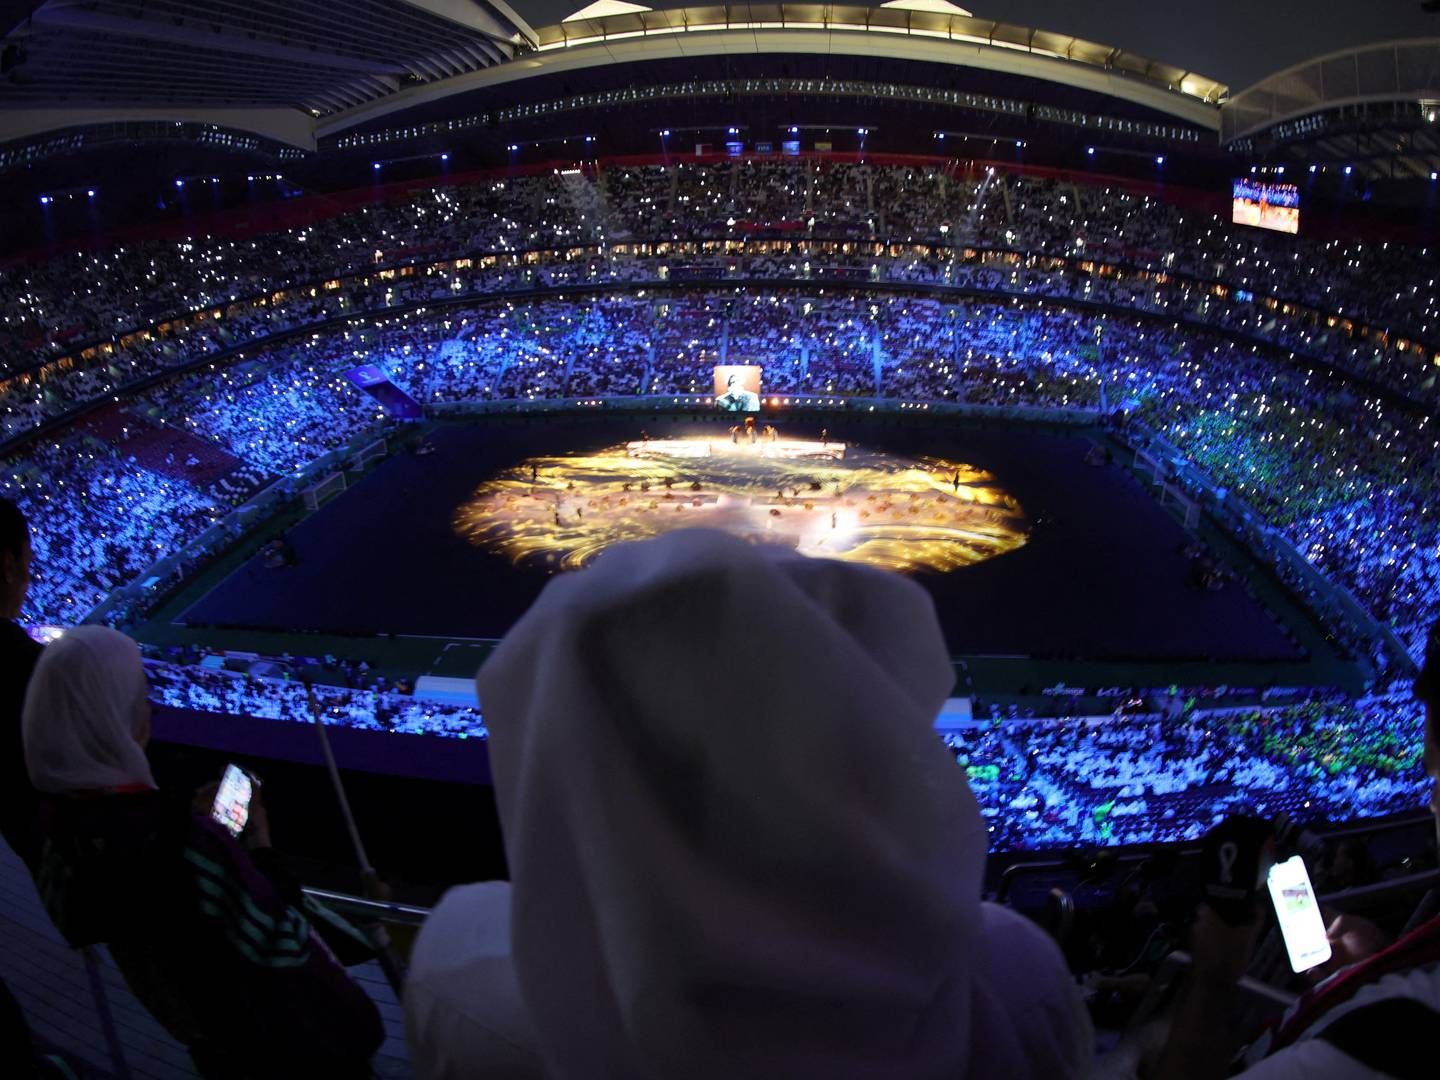 Al Bayt Stadium during the opening ceremony of the FIFA World Cup in Qatar 2022. | Photo: AMR ABDALLAH DALSH/REUTERS / X90179